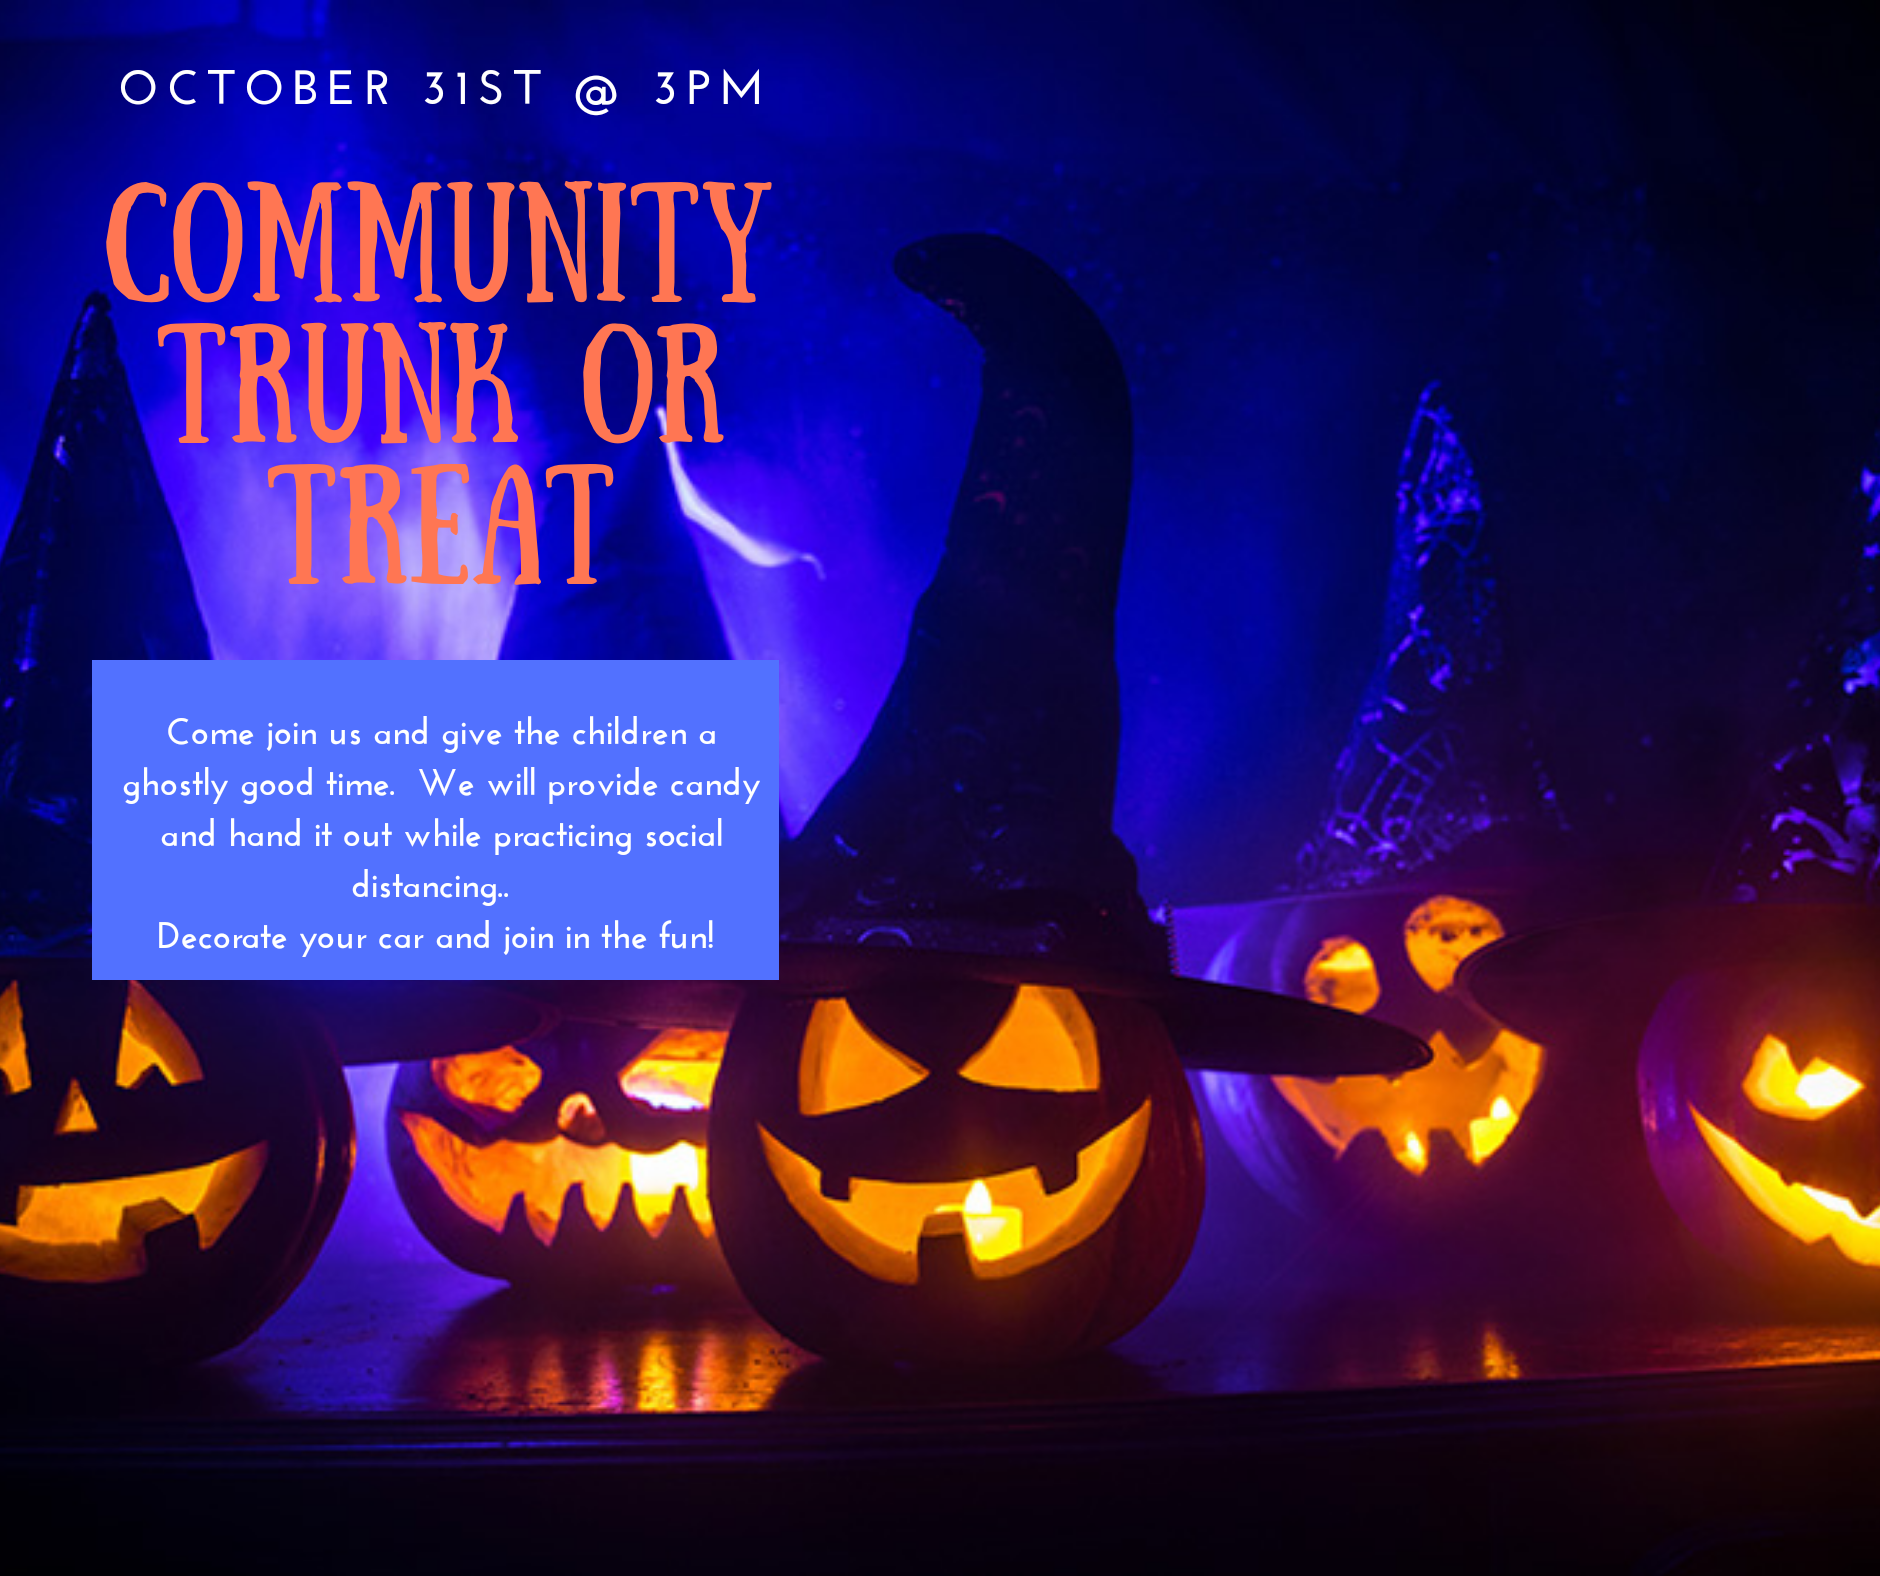 Trunk or Treat Sat - Oct 31 at 3pm